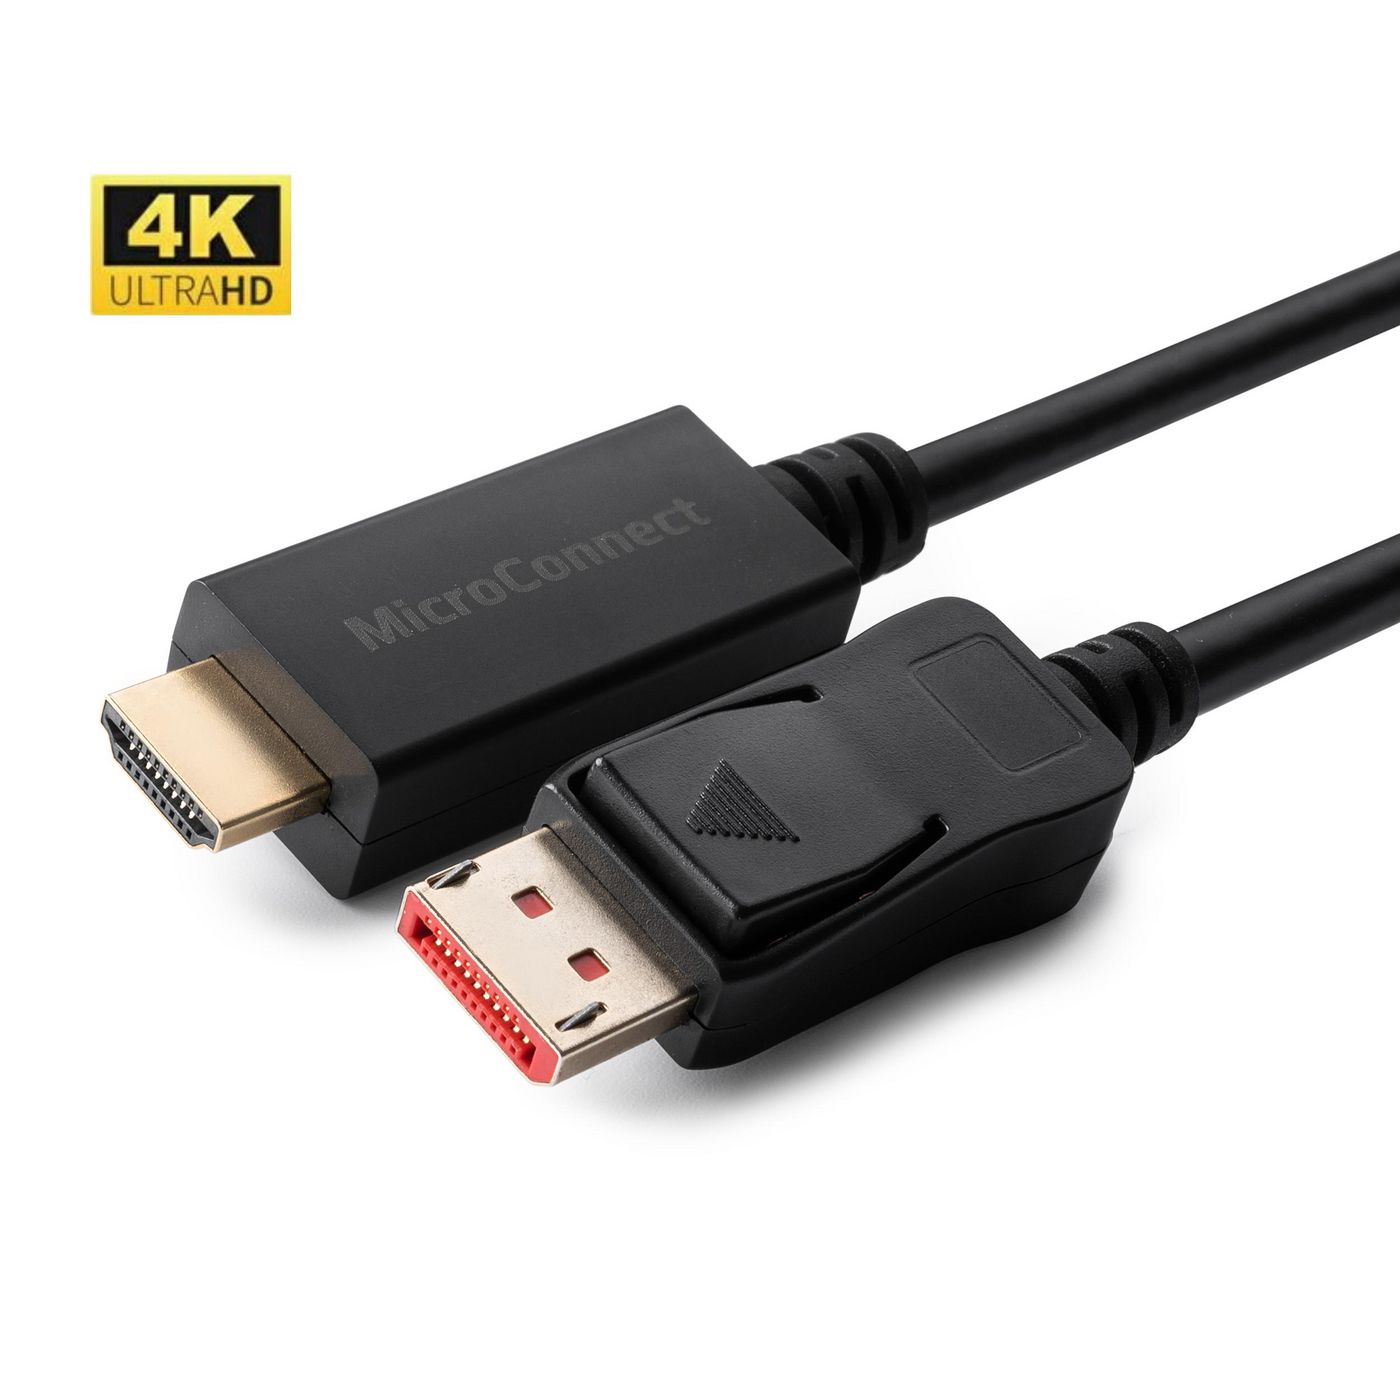 DisplayPort To Hdmi Cable 4k Supports 4k/ 2k 60hz - 2m